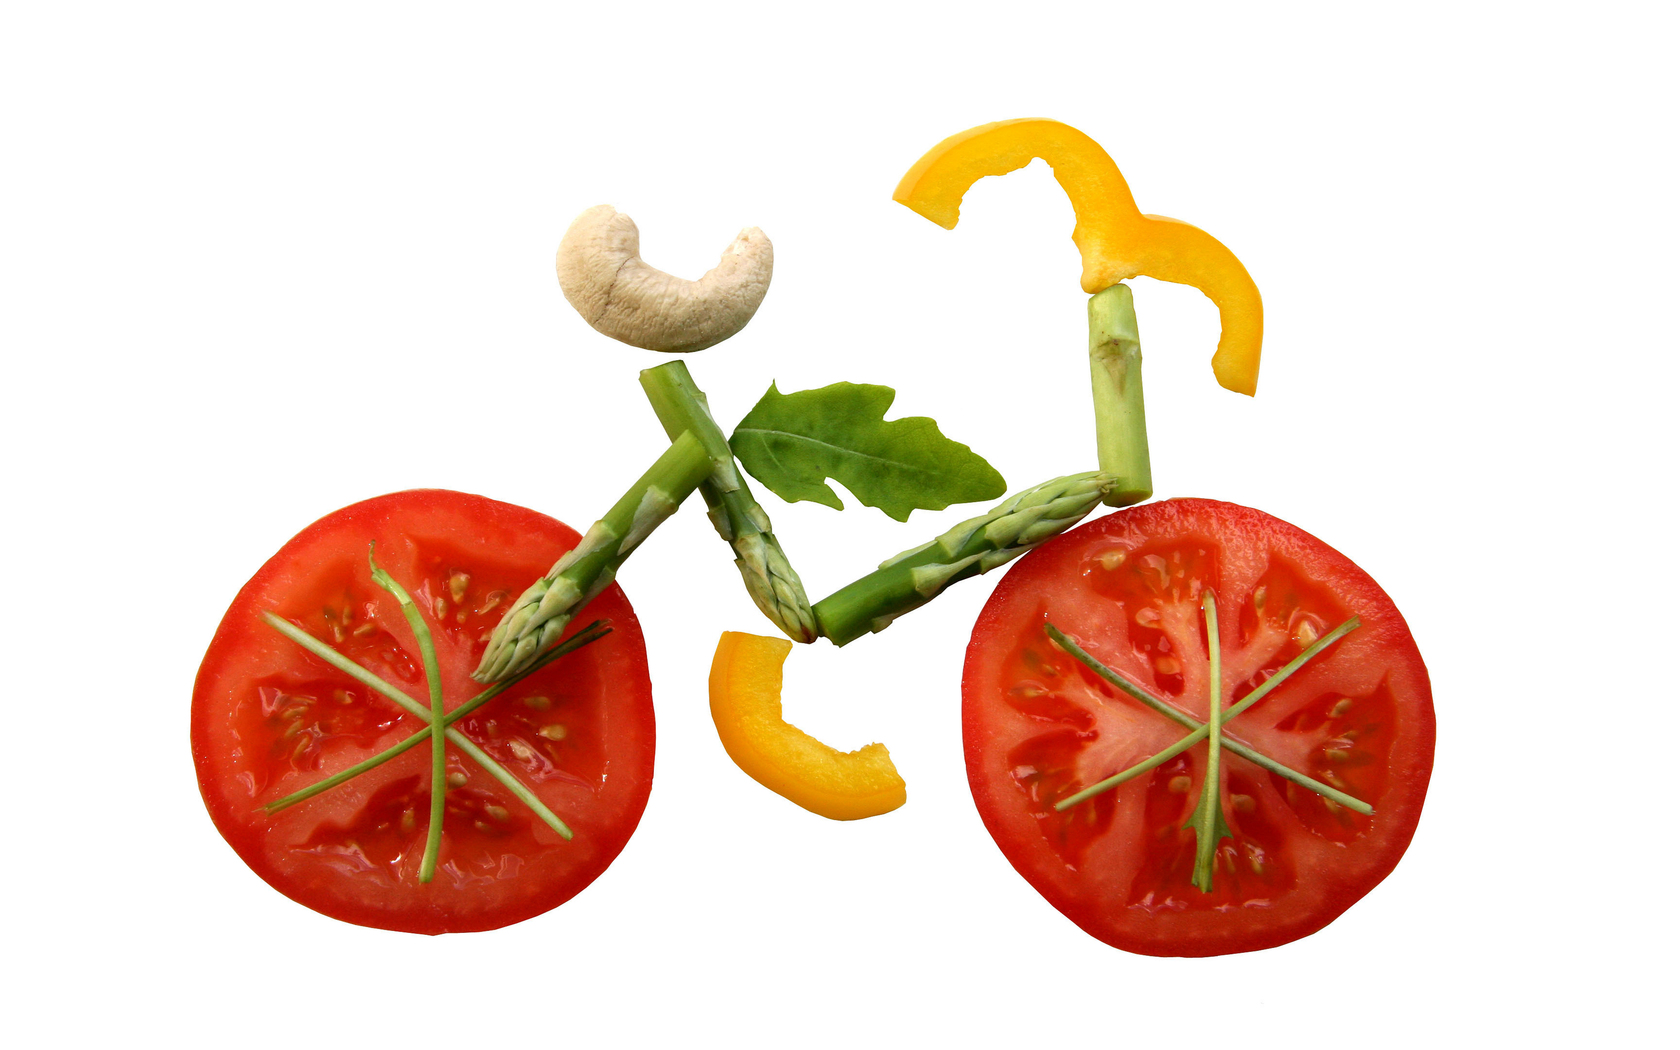 Funny Vegetable Bicycle Image